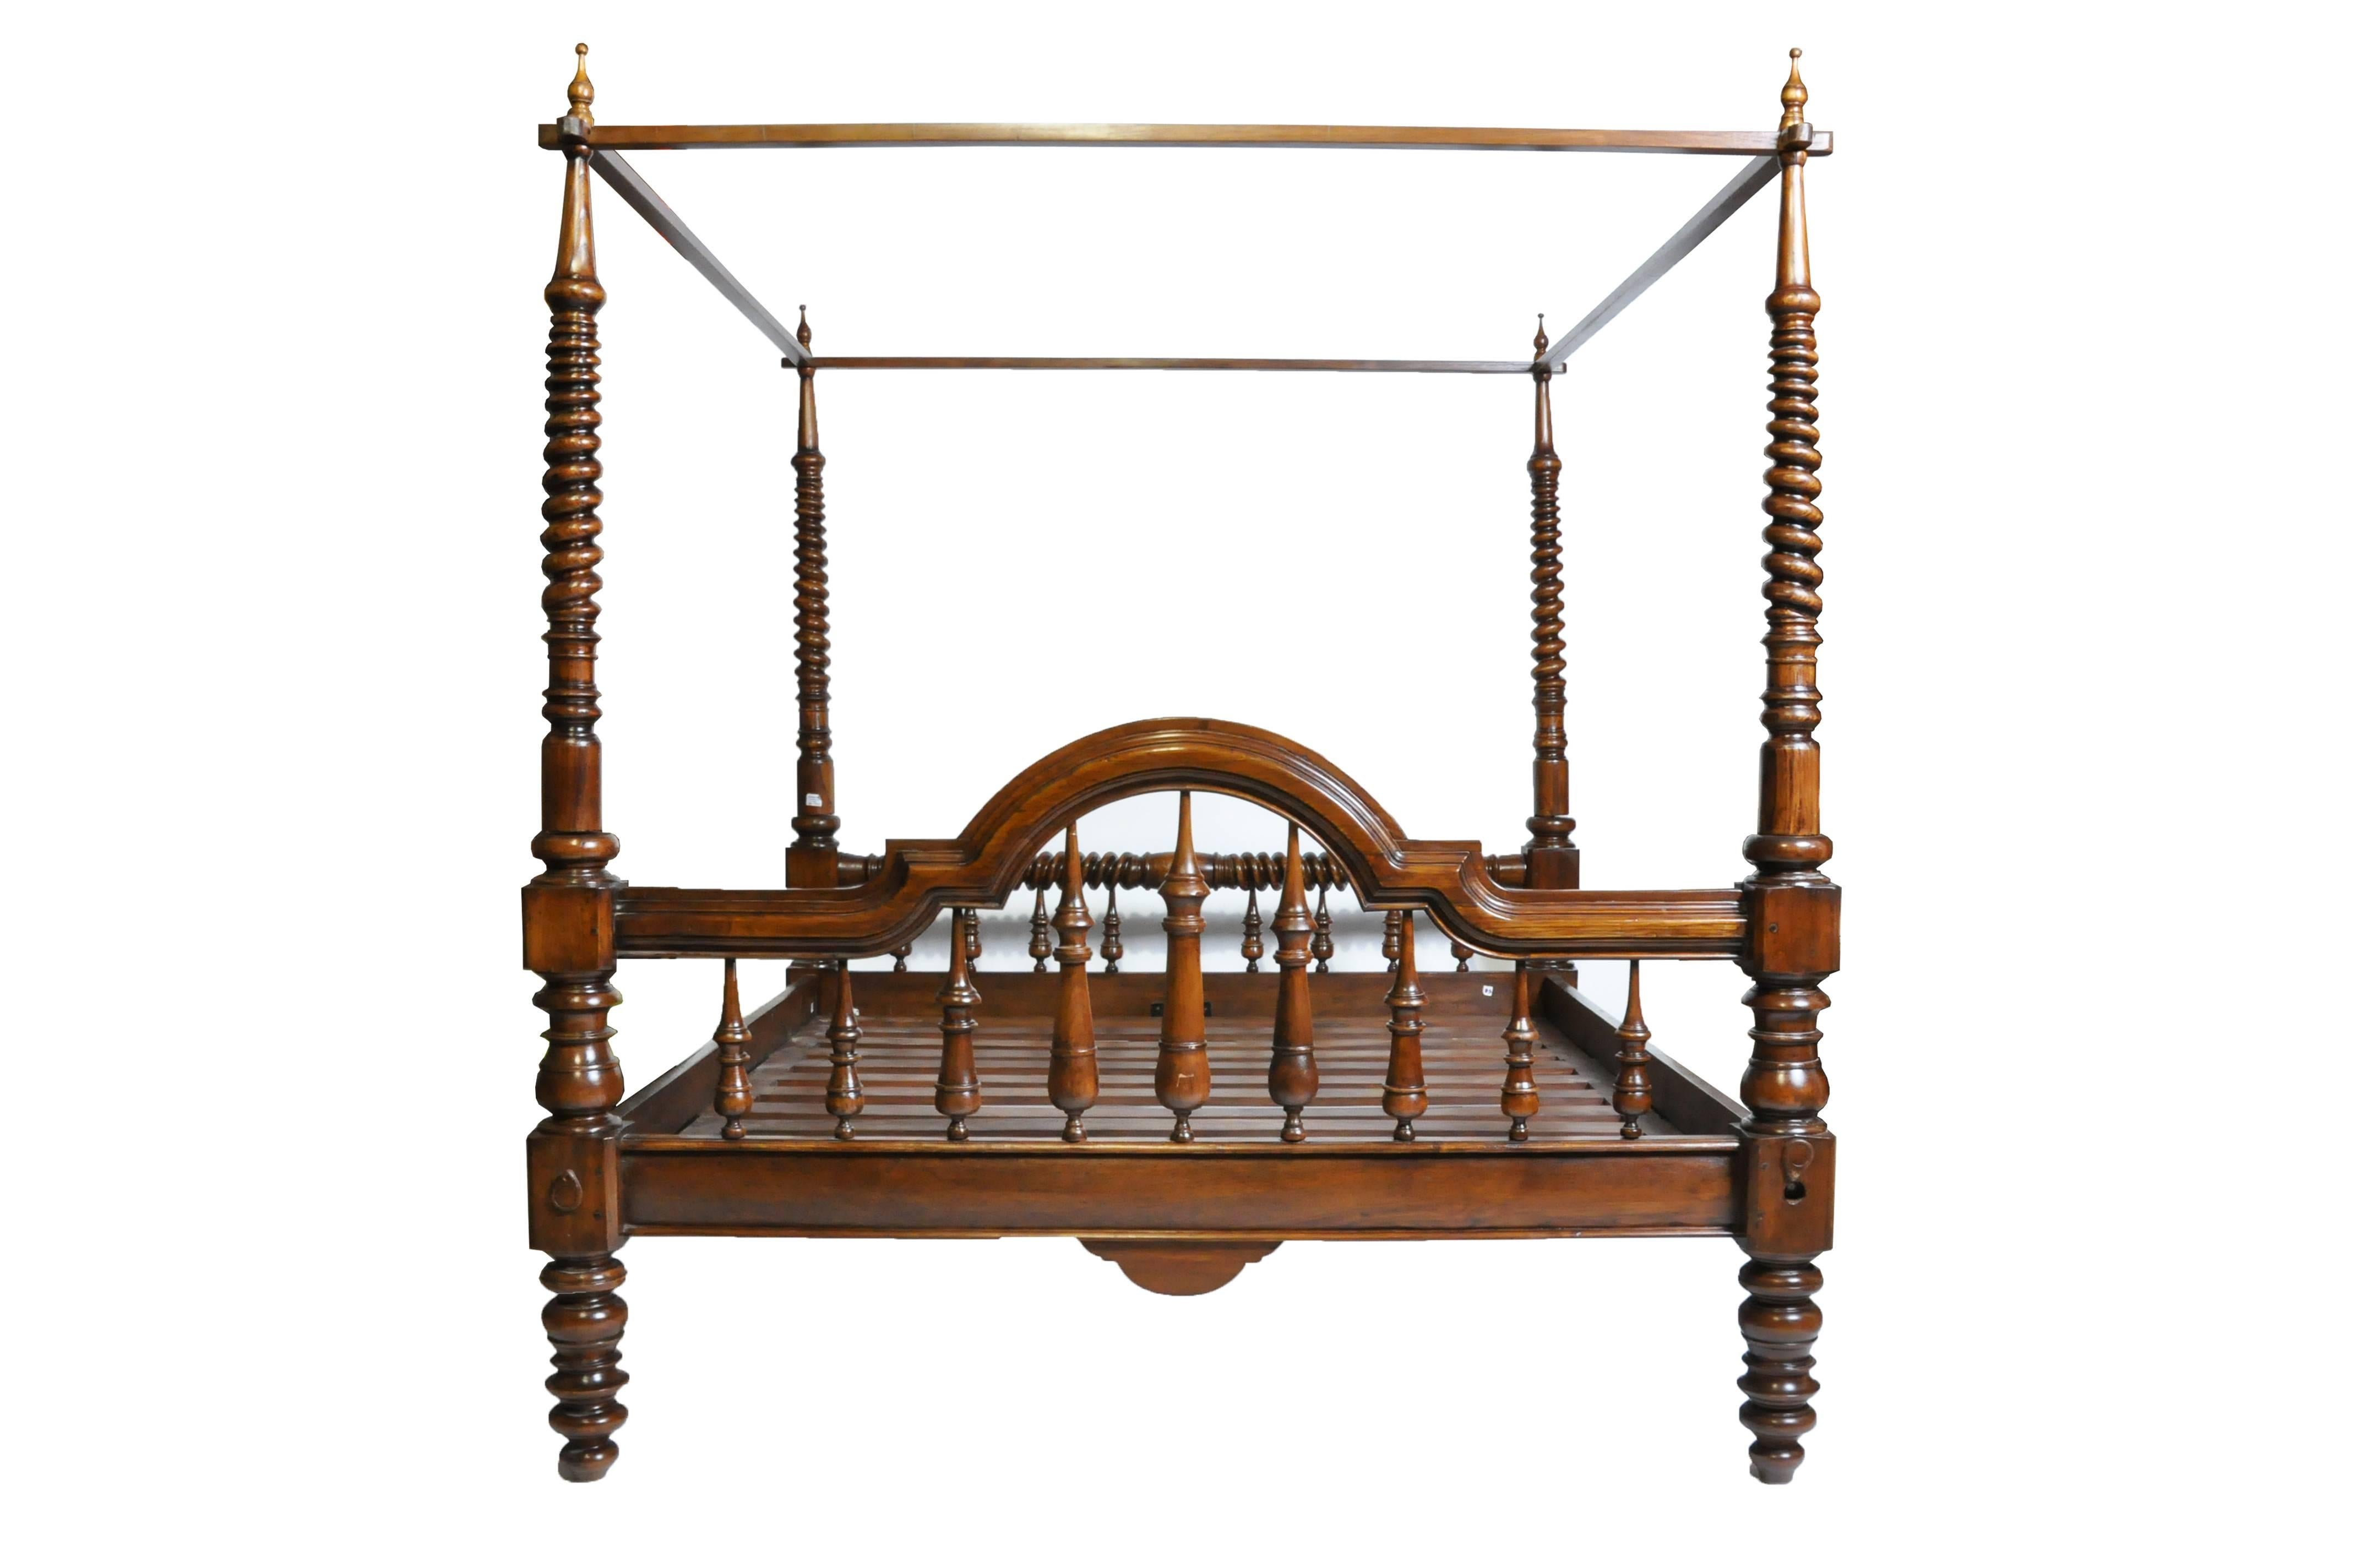 This impressive British Colonial bed is from Chiang Mai, Thailand and was made from teak wood, circa 1900. The bed features beautiful hand-carved work, posts for a canopy, and the teak wood is strong and sturdy ideal for any types of climates; teak